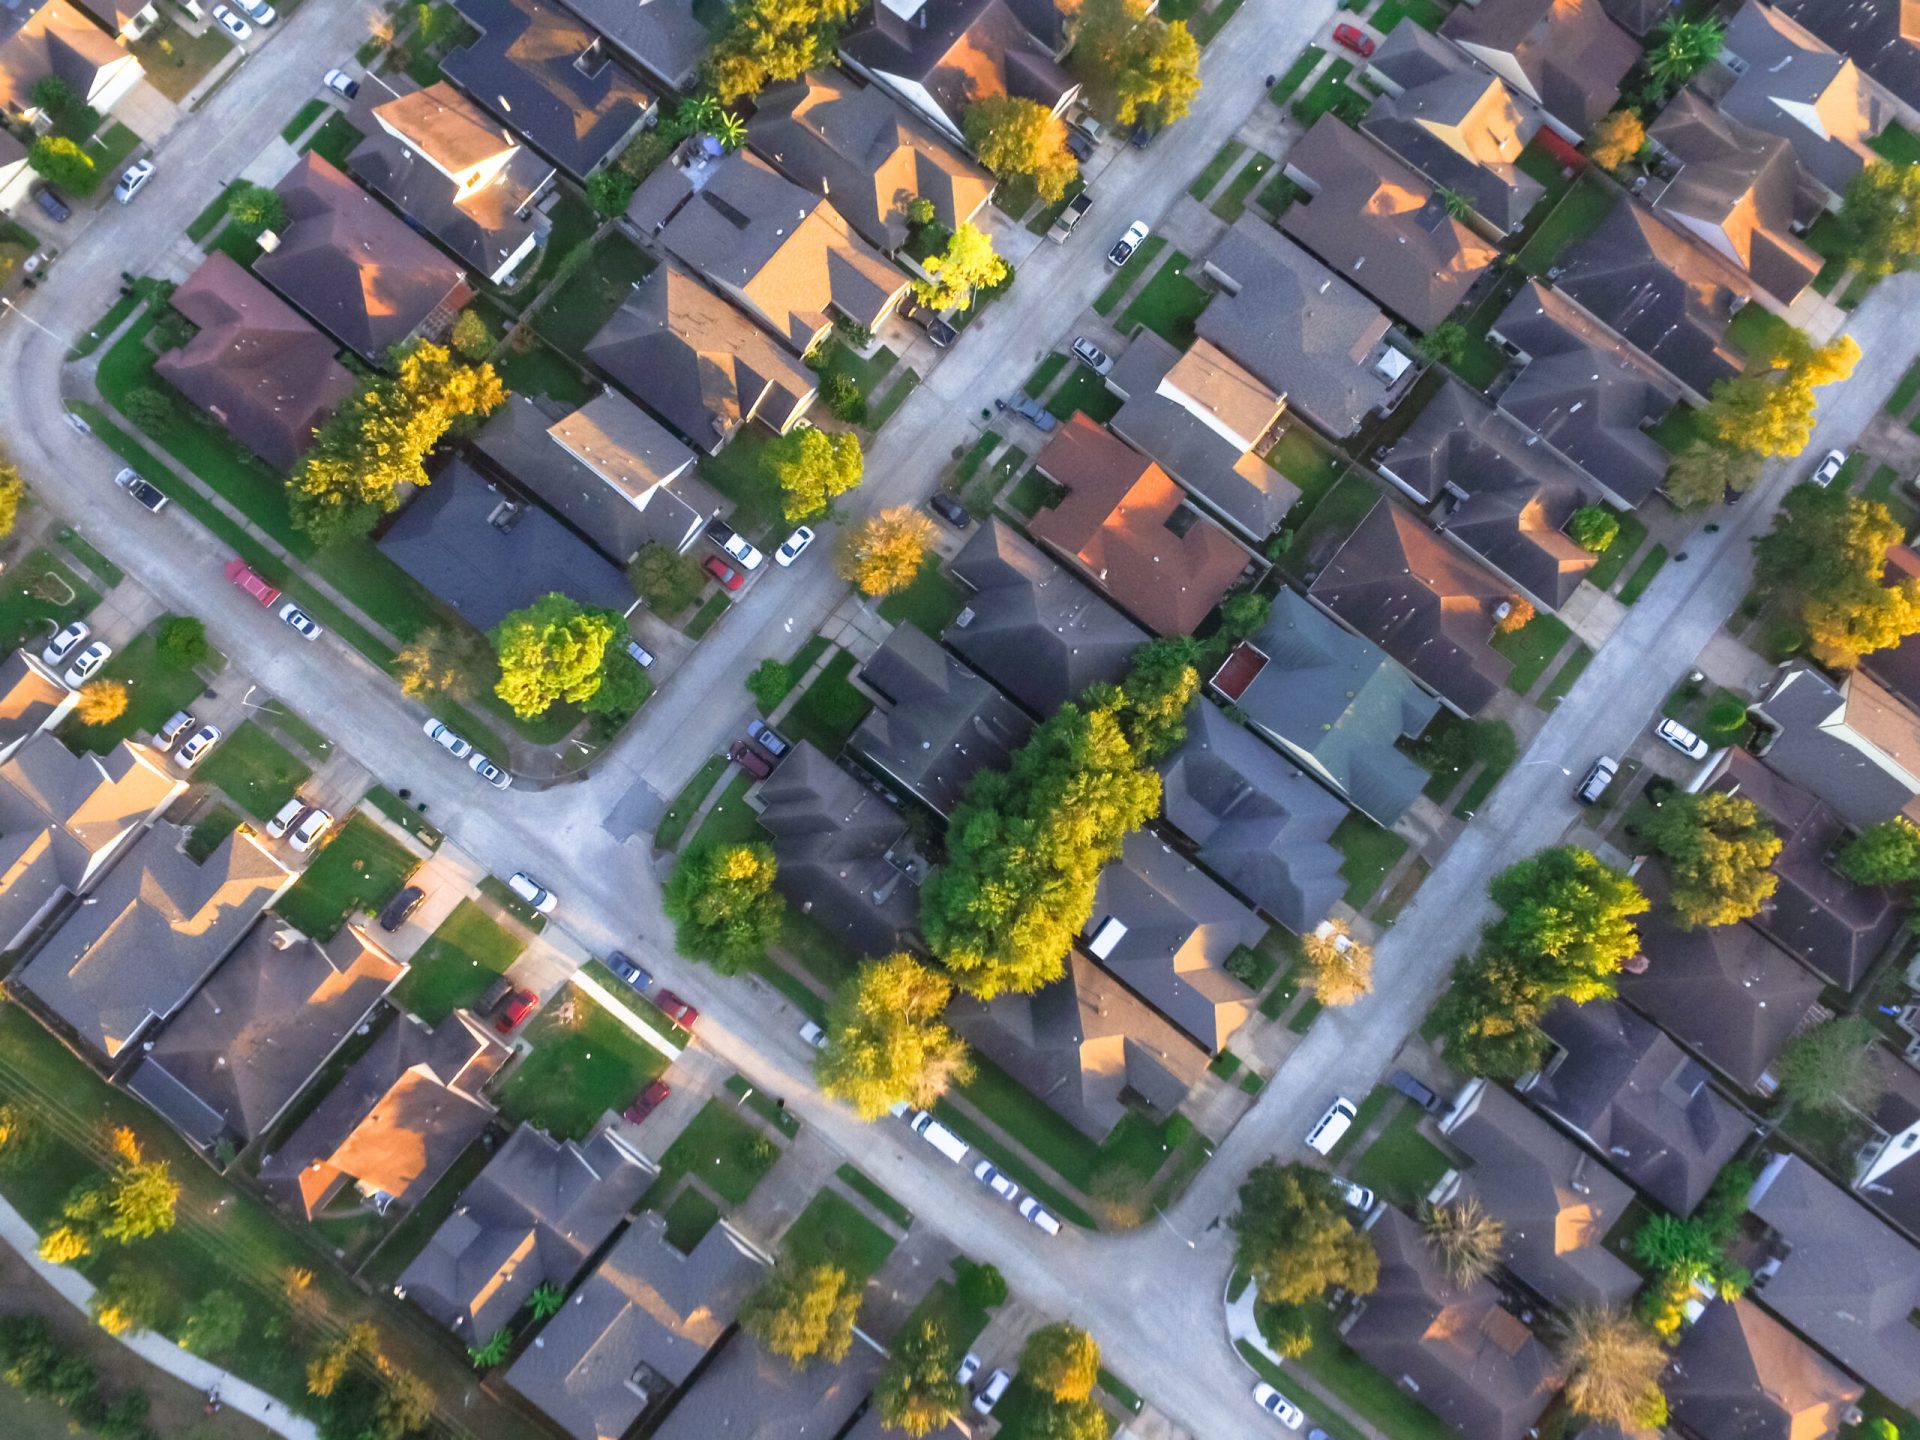 Aerial view of residential houses and driveways neighbourhood during a fall sunset.